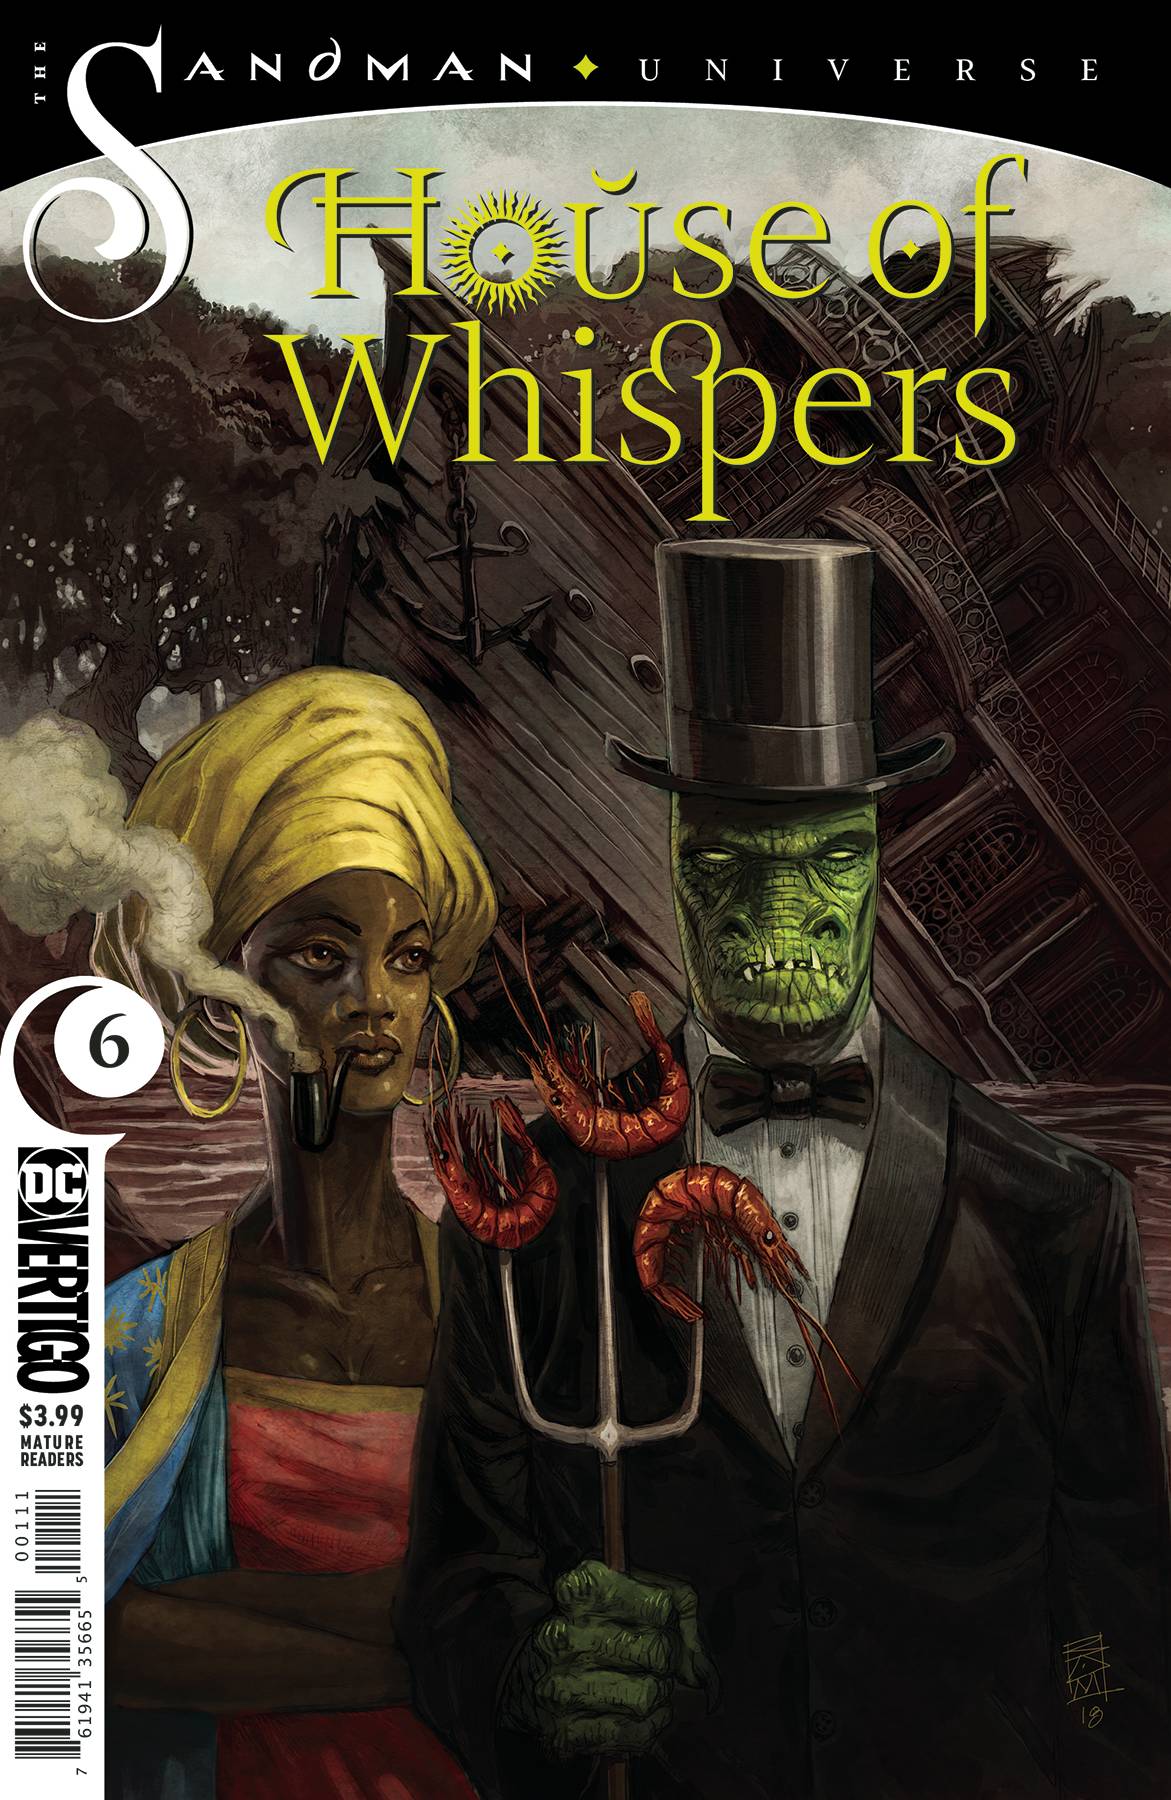 House of Whispers #6 (Mature)